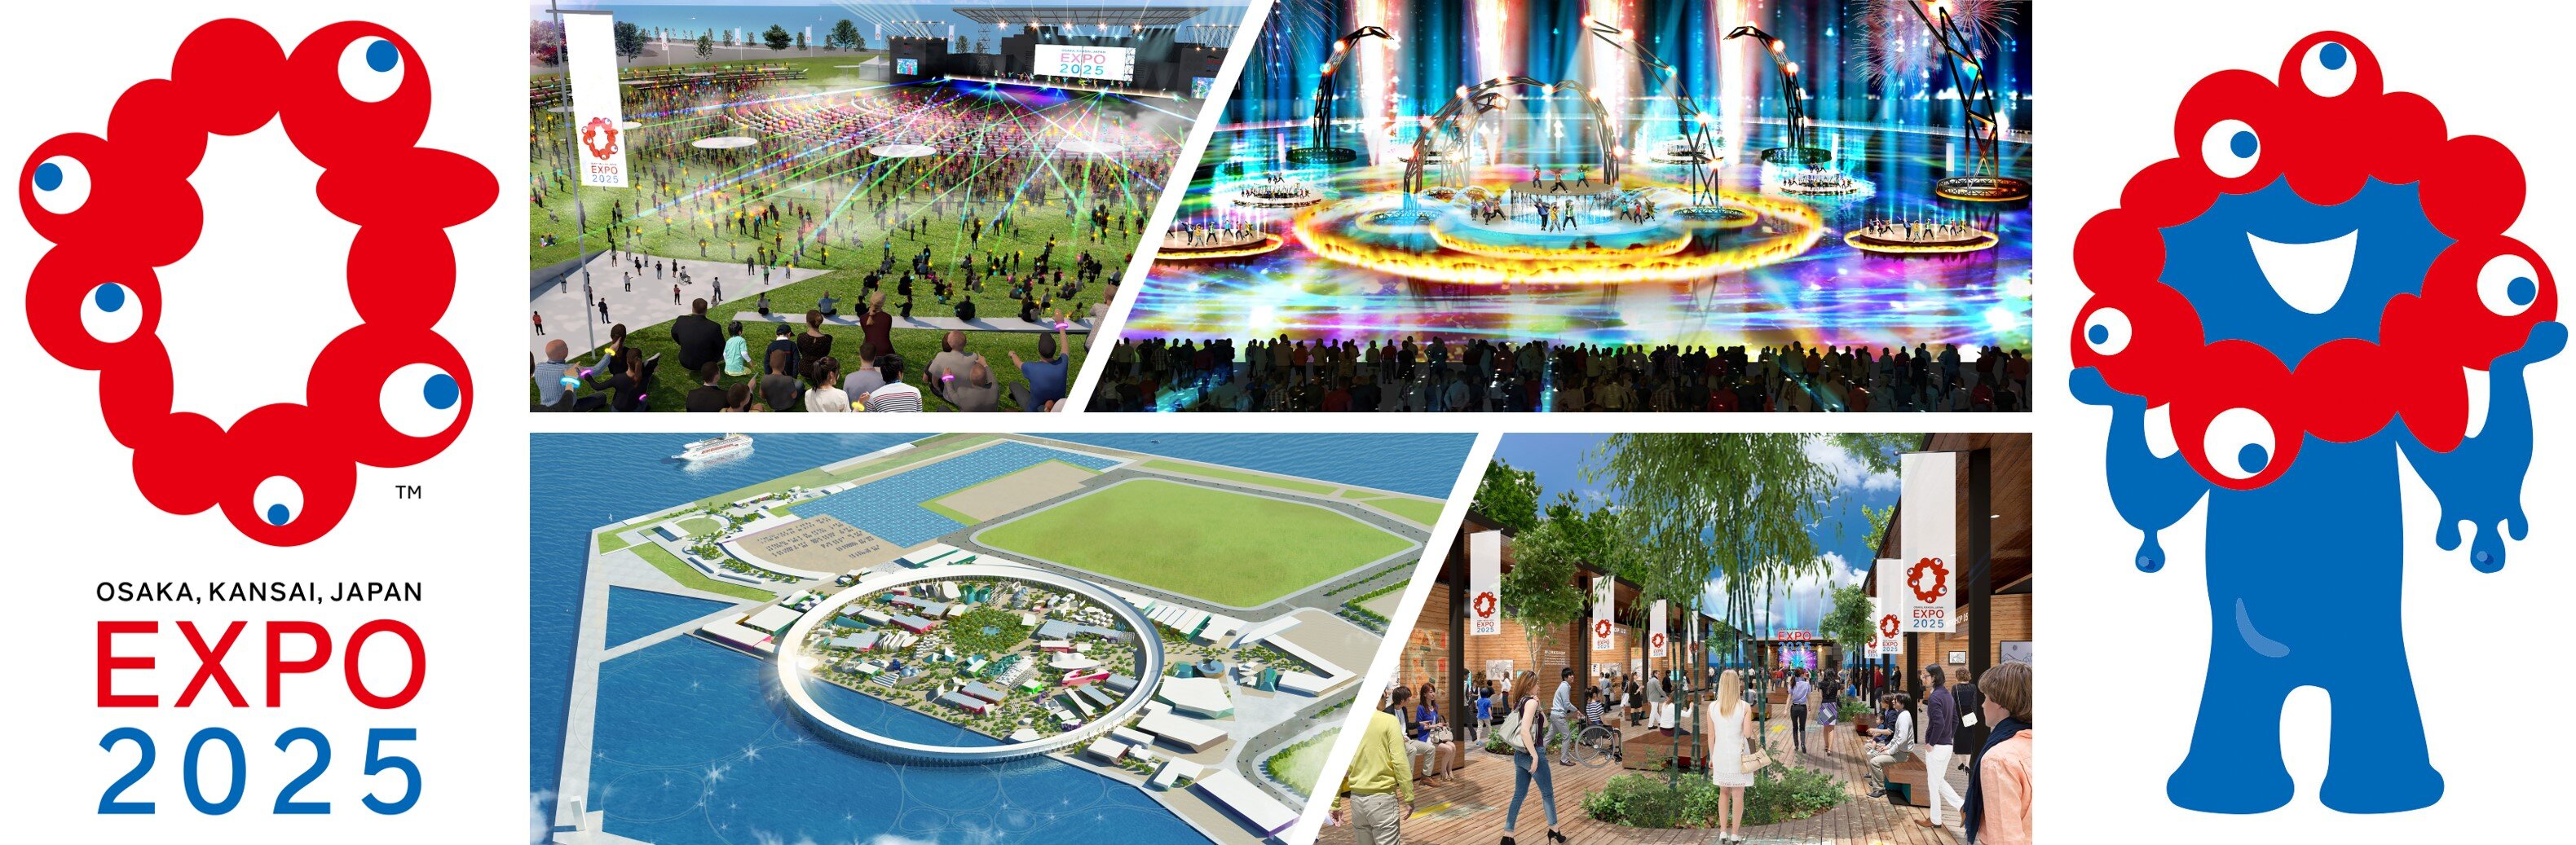 Expo 2025 Osaka, Kansai is only three years away, here is what you need